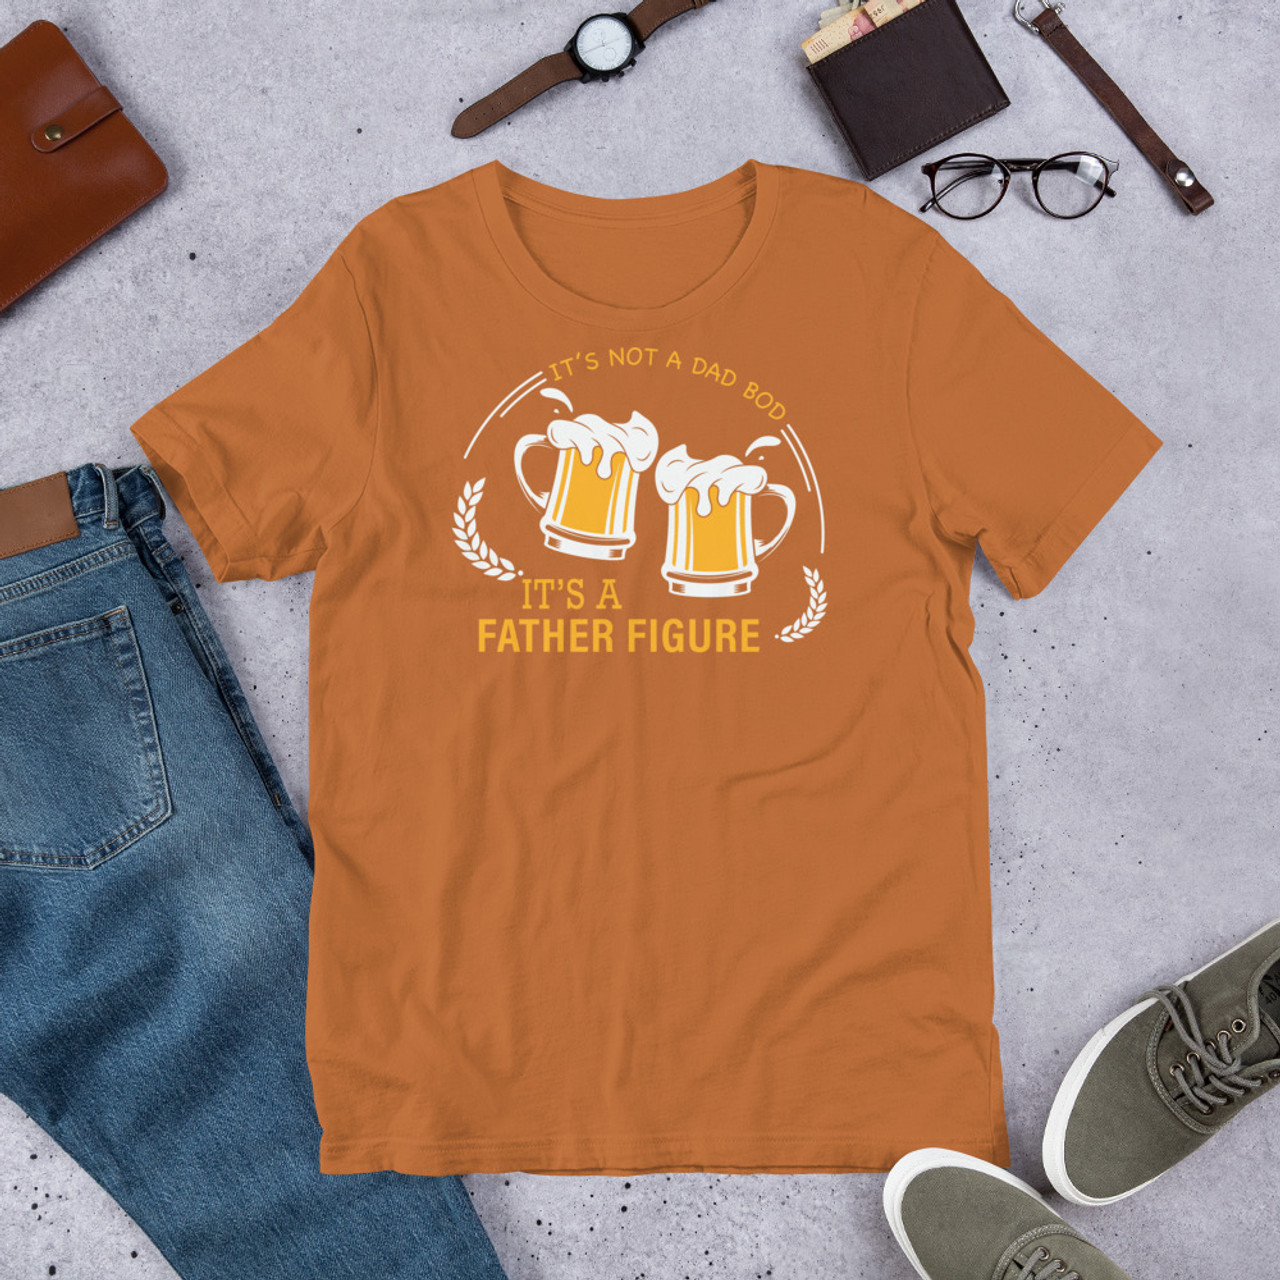 Toast t shirt It's not a dad bod